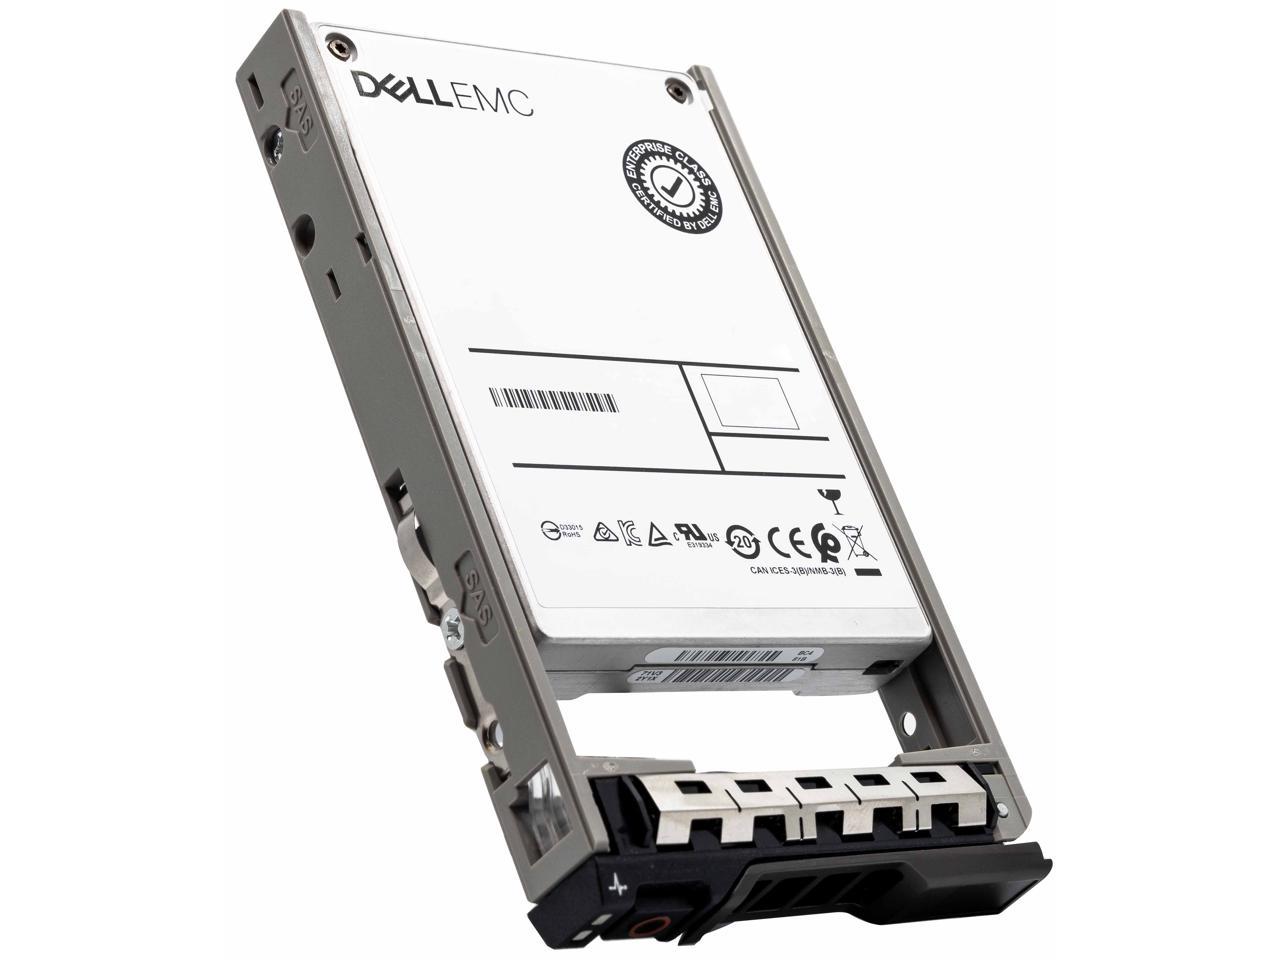 Dell G13 400-AMJE 800GB SAS 12Gb/s 2.5" Manufacturer Recertified SSD